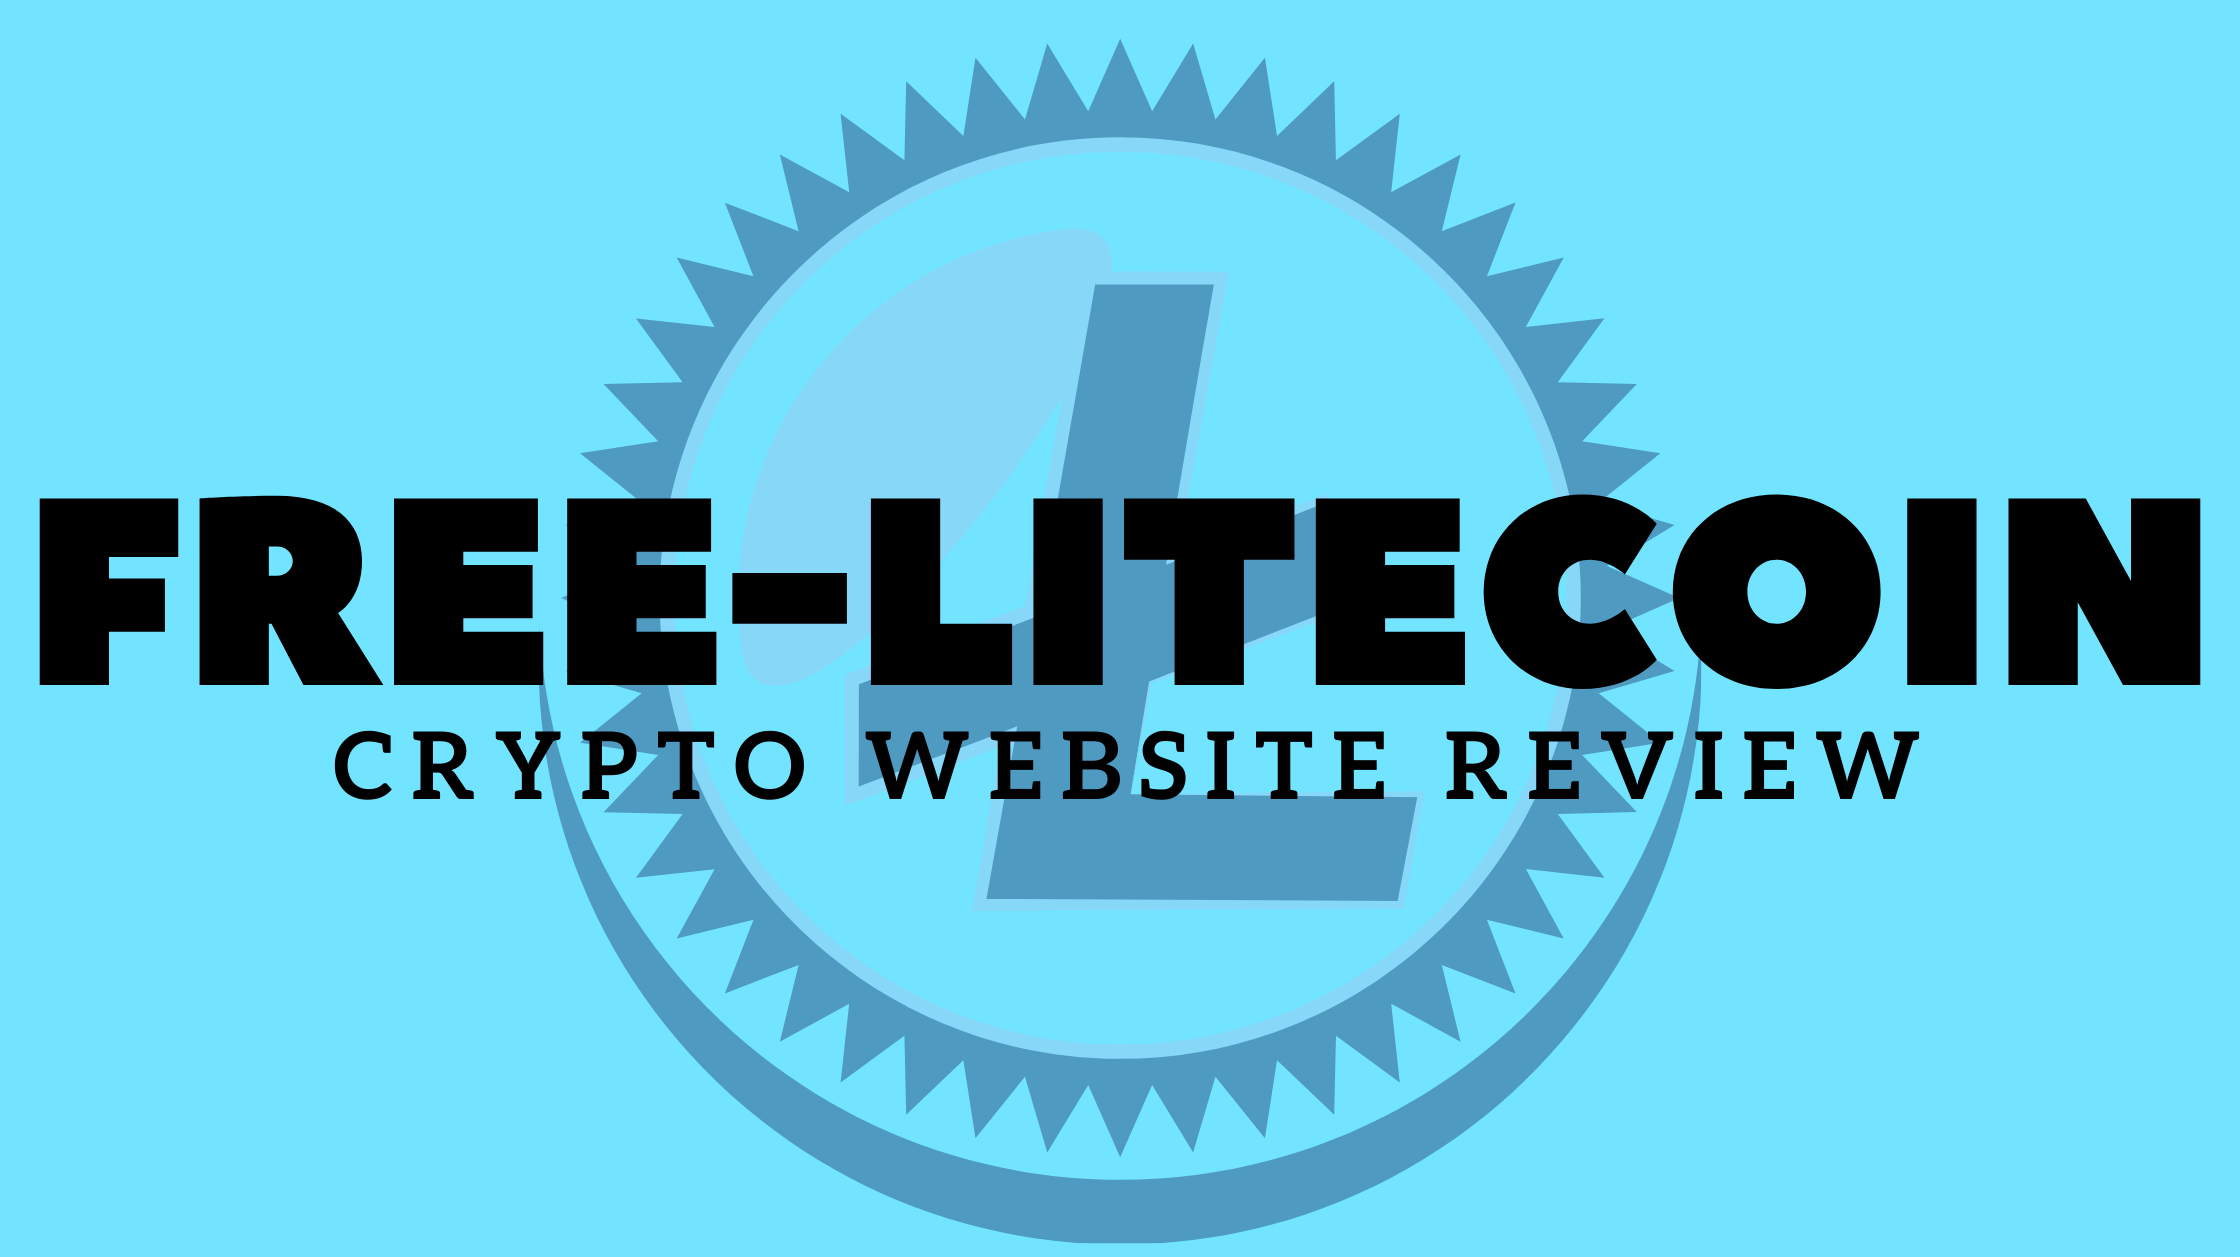 Moon Litecoin – How to earn Litecoin for free? - We Hold Crypto